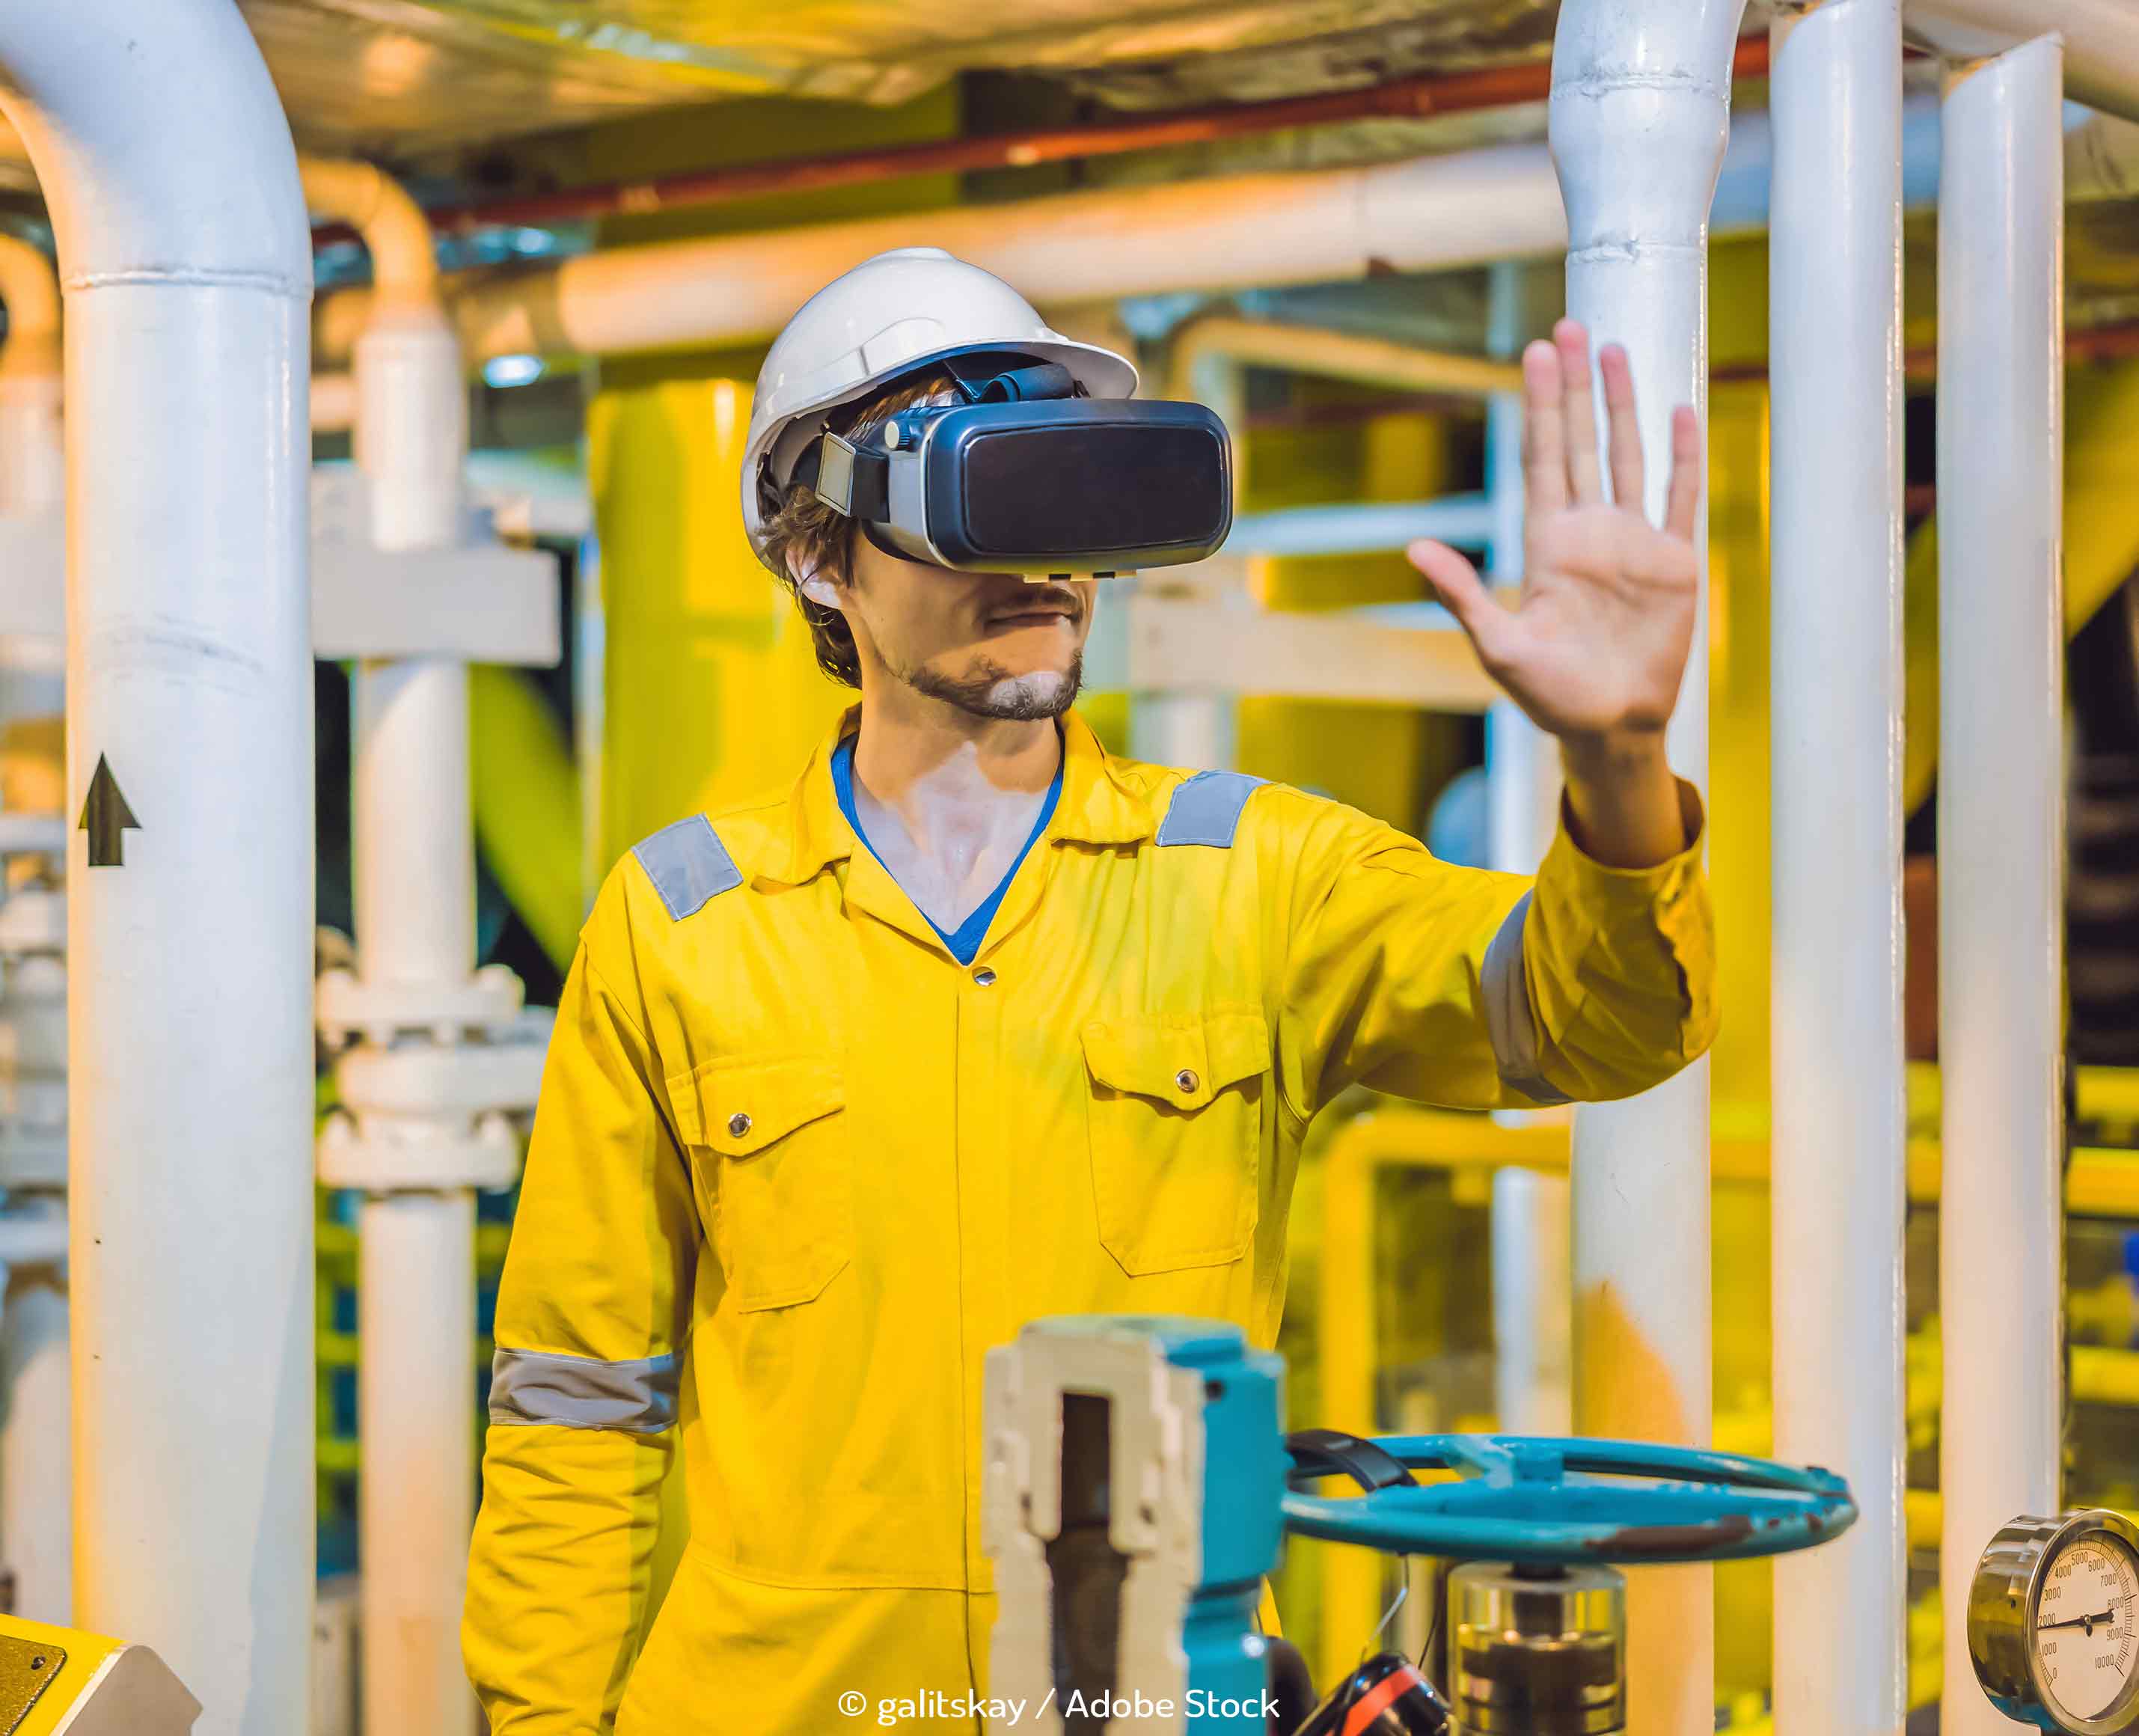 VR Training for Gas and Oil Industry Jobs